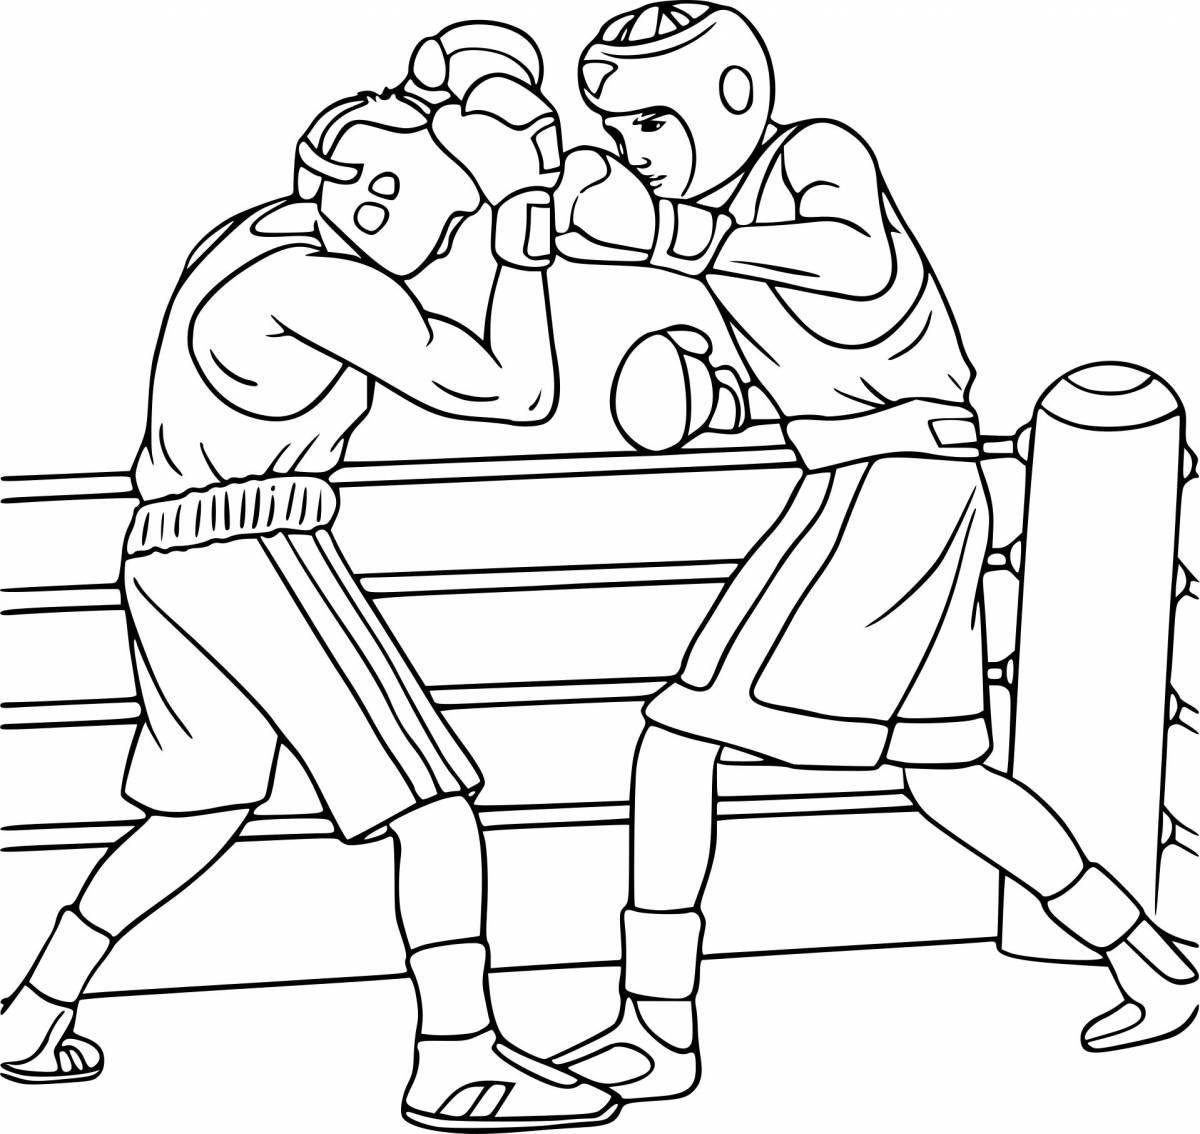 Great boxing and boo coloring book for kids